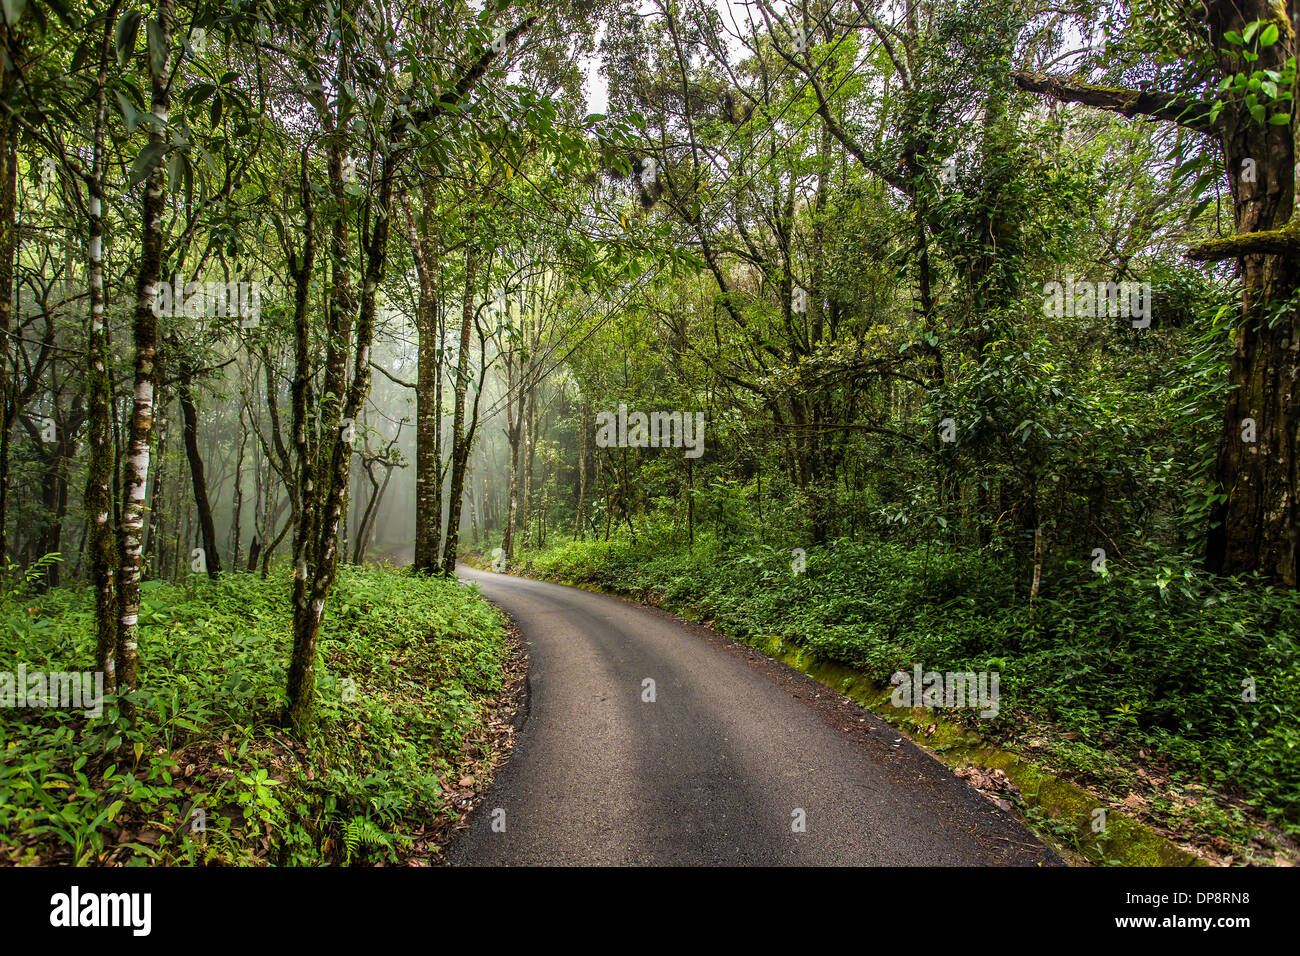 Misty road in the forest Stock Photo